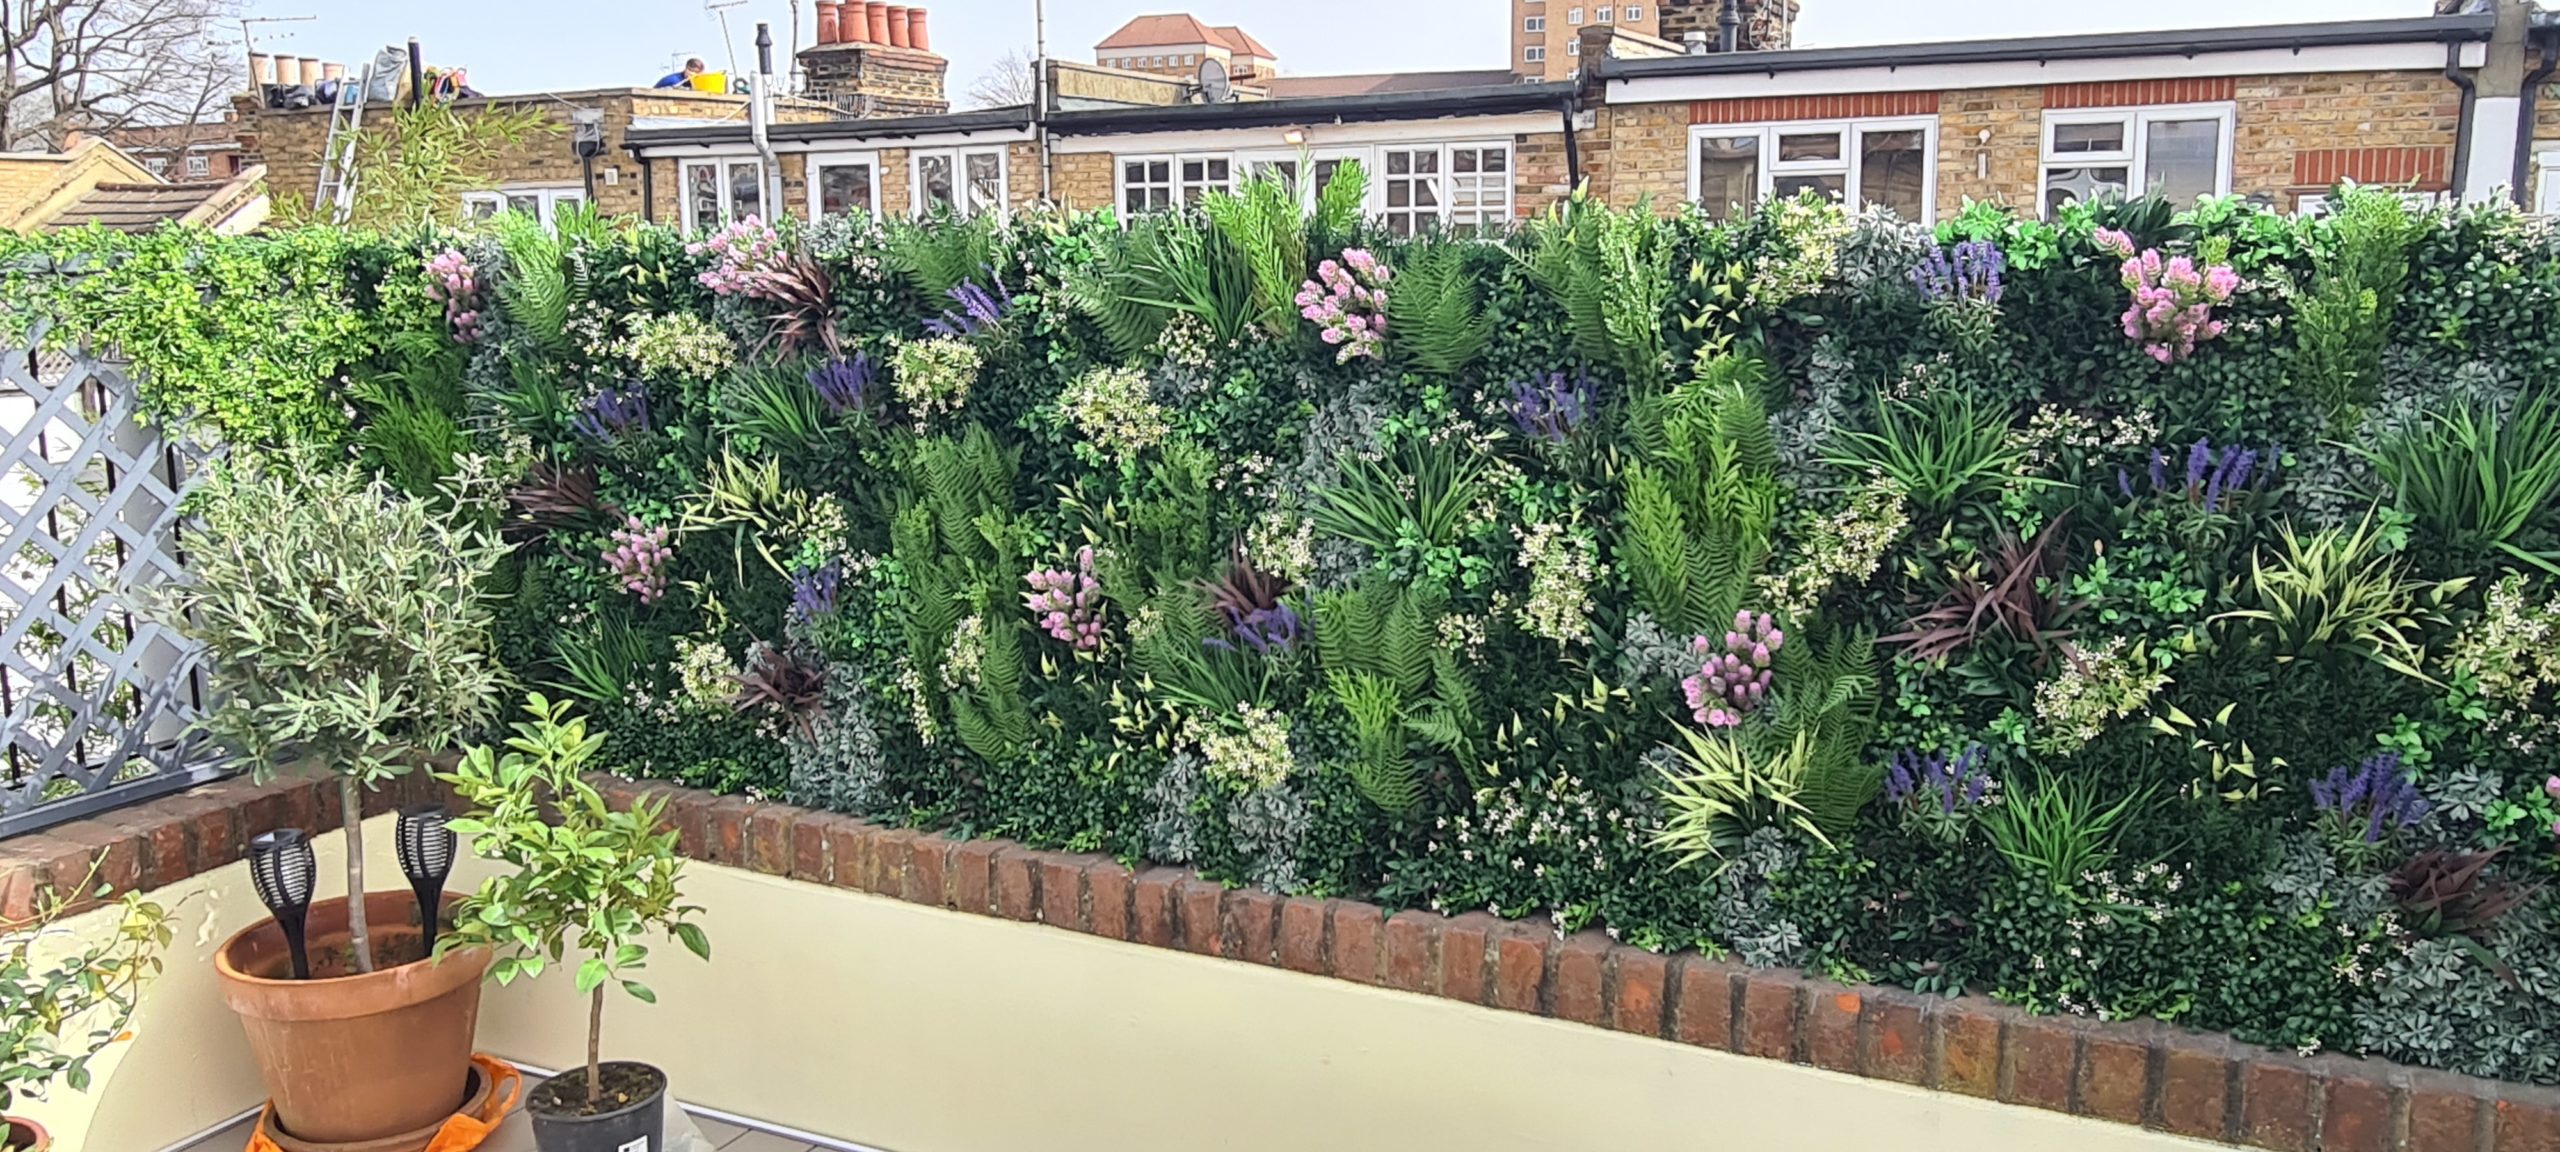 A green wall installation by Vistafolia on a London roof terrace